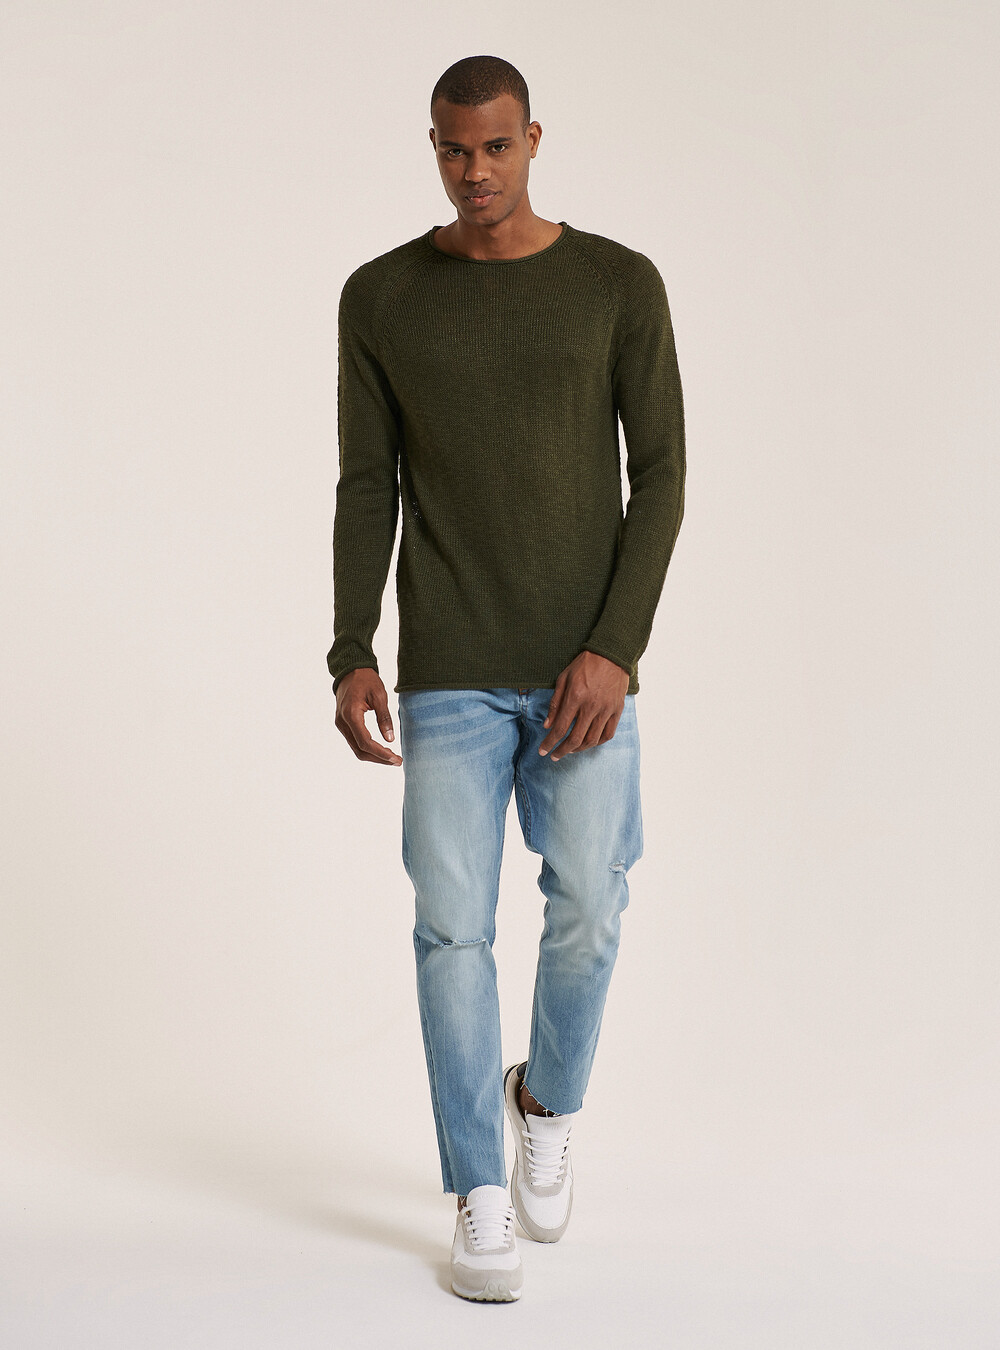 Pullover with open neckline and raw cut